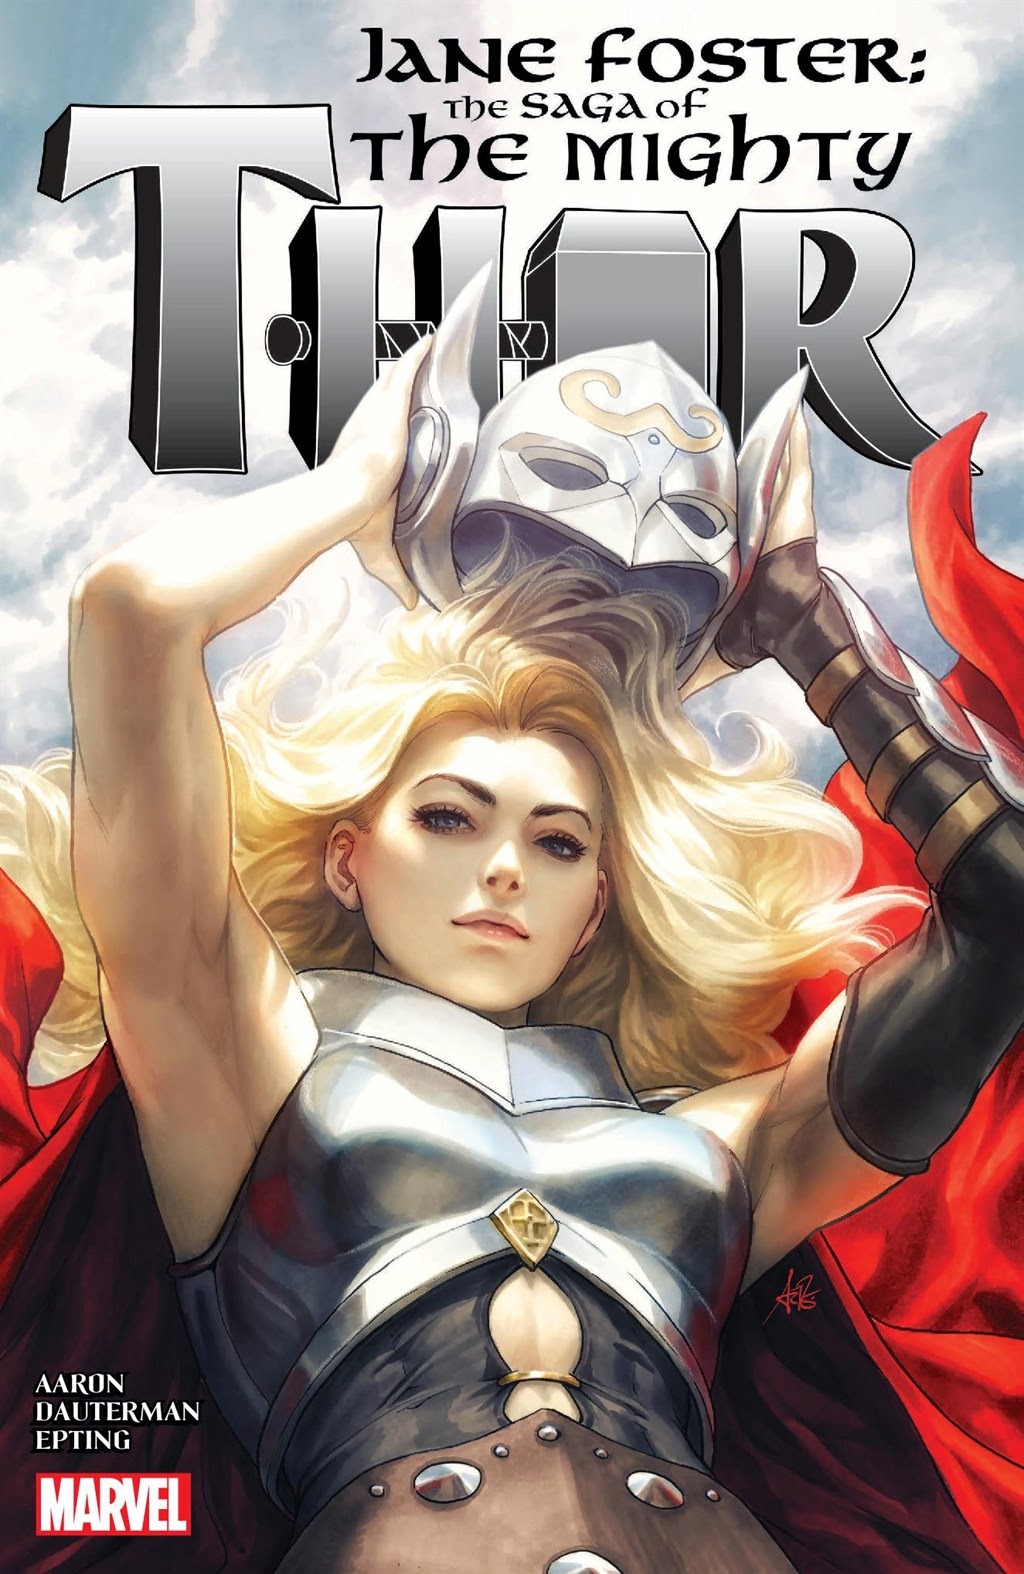 Read online Jane Foster: The Saga of the Mighty Thor comic -  Issue # TPB (Part 1) - 1